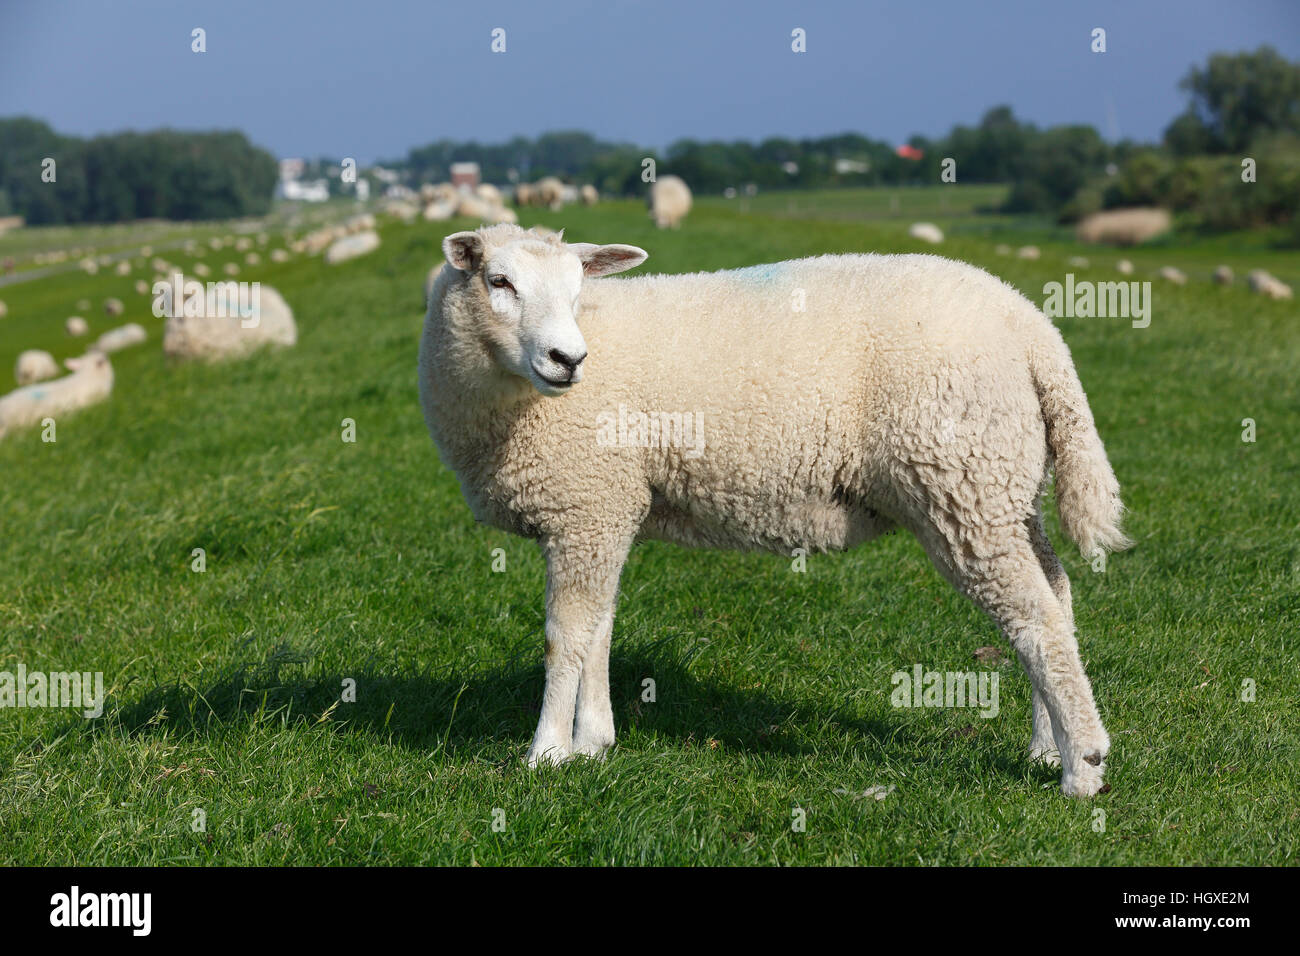 Wedeler Marsch High Resolution Stock Photography and Images - Alamy